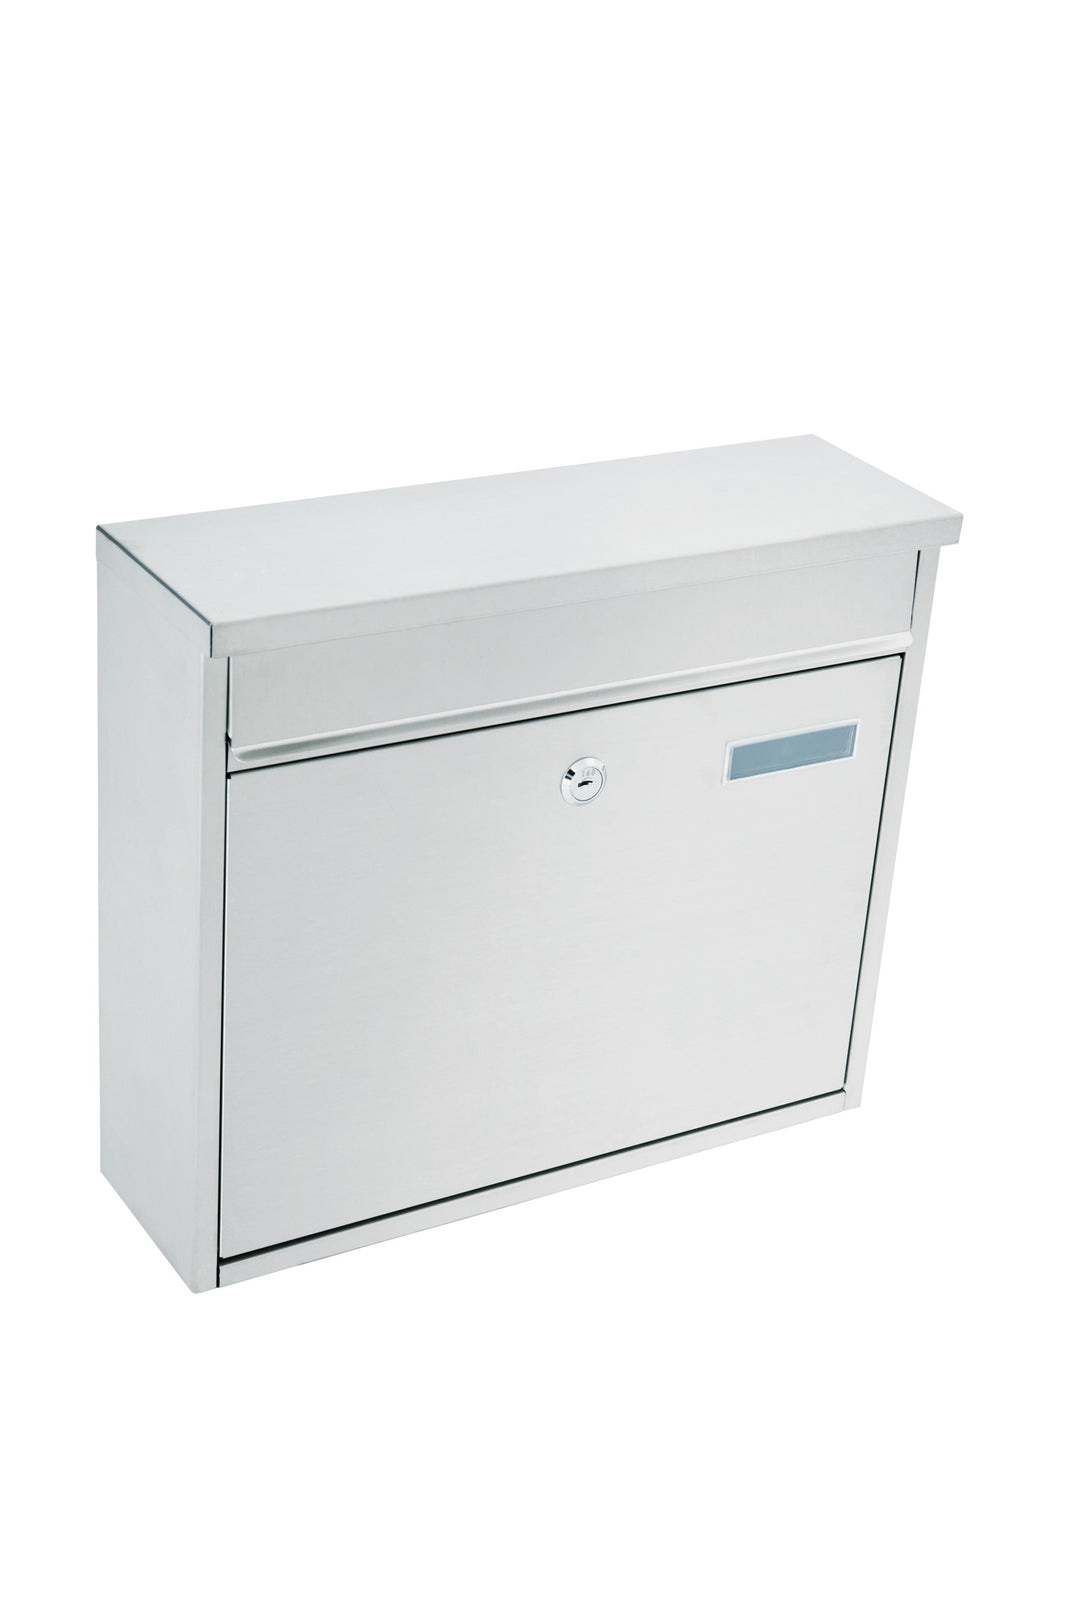 Barrow Stainless Steel Letterbox